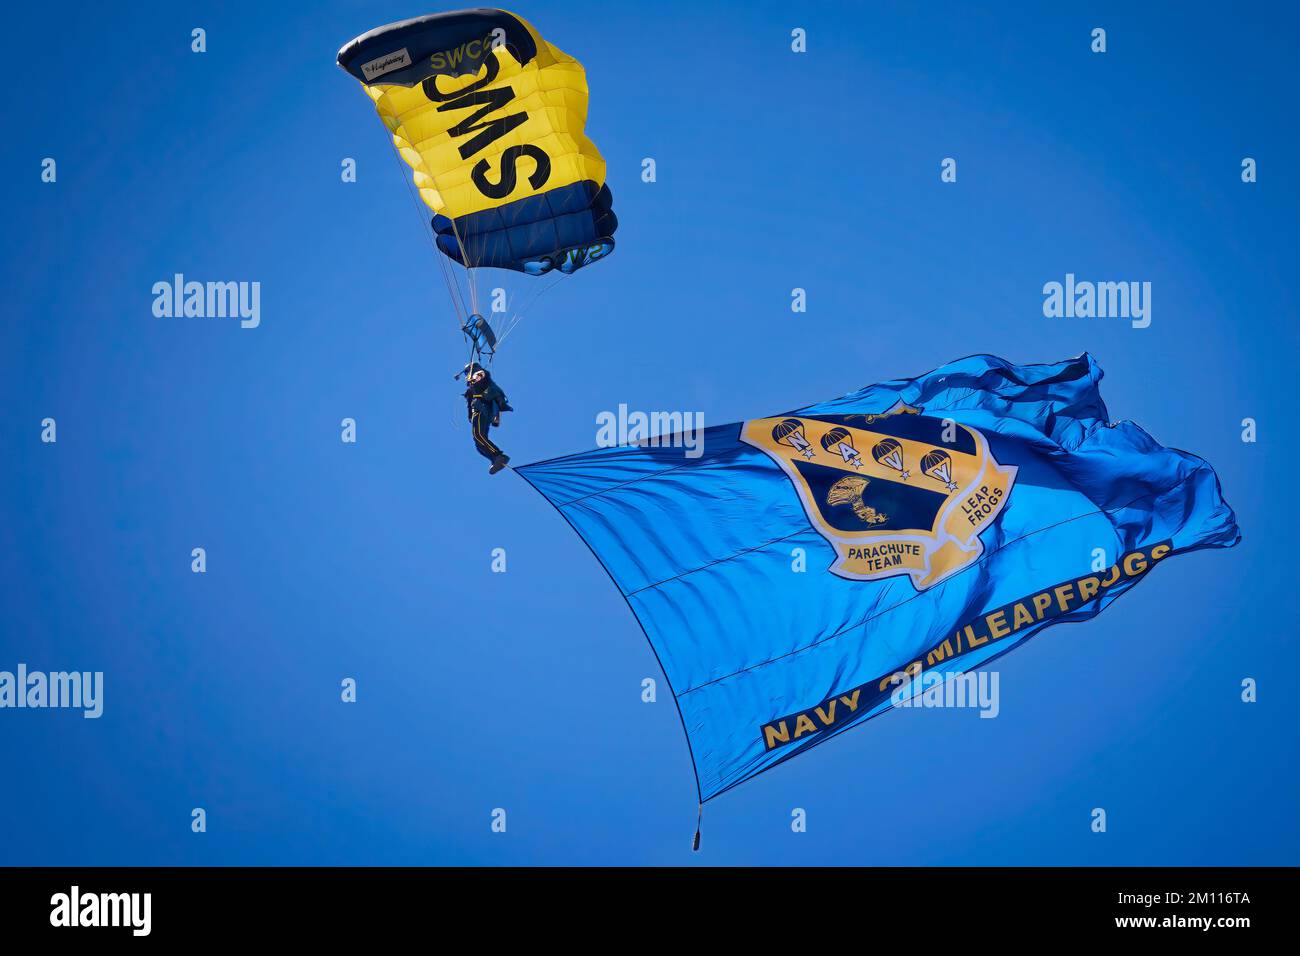 The US Navy Leapfrog parachute team in the skies over the 2022 Miramar Airshow at San Diego, California. Stock Photo